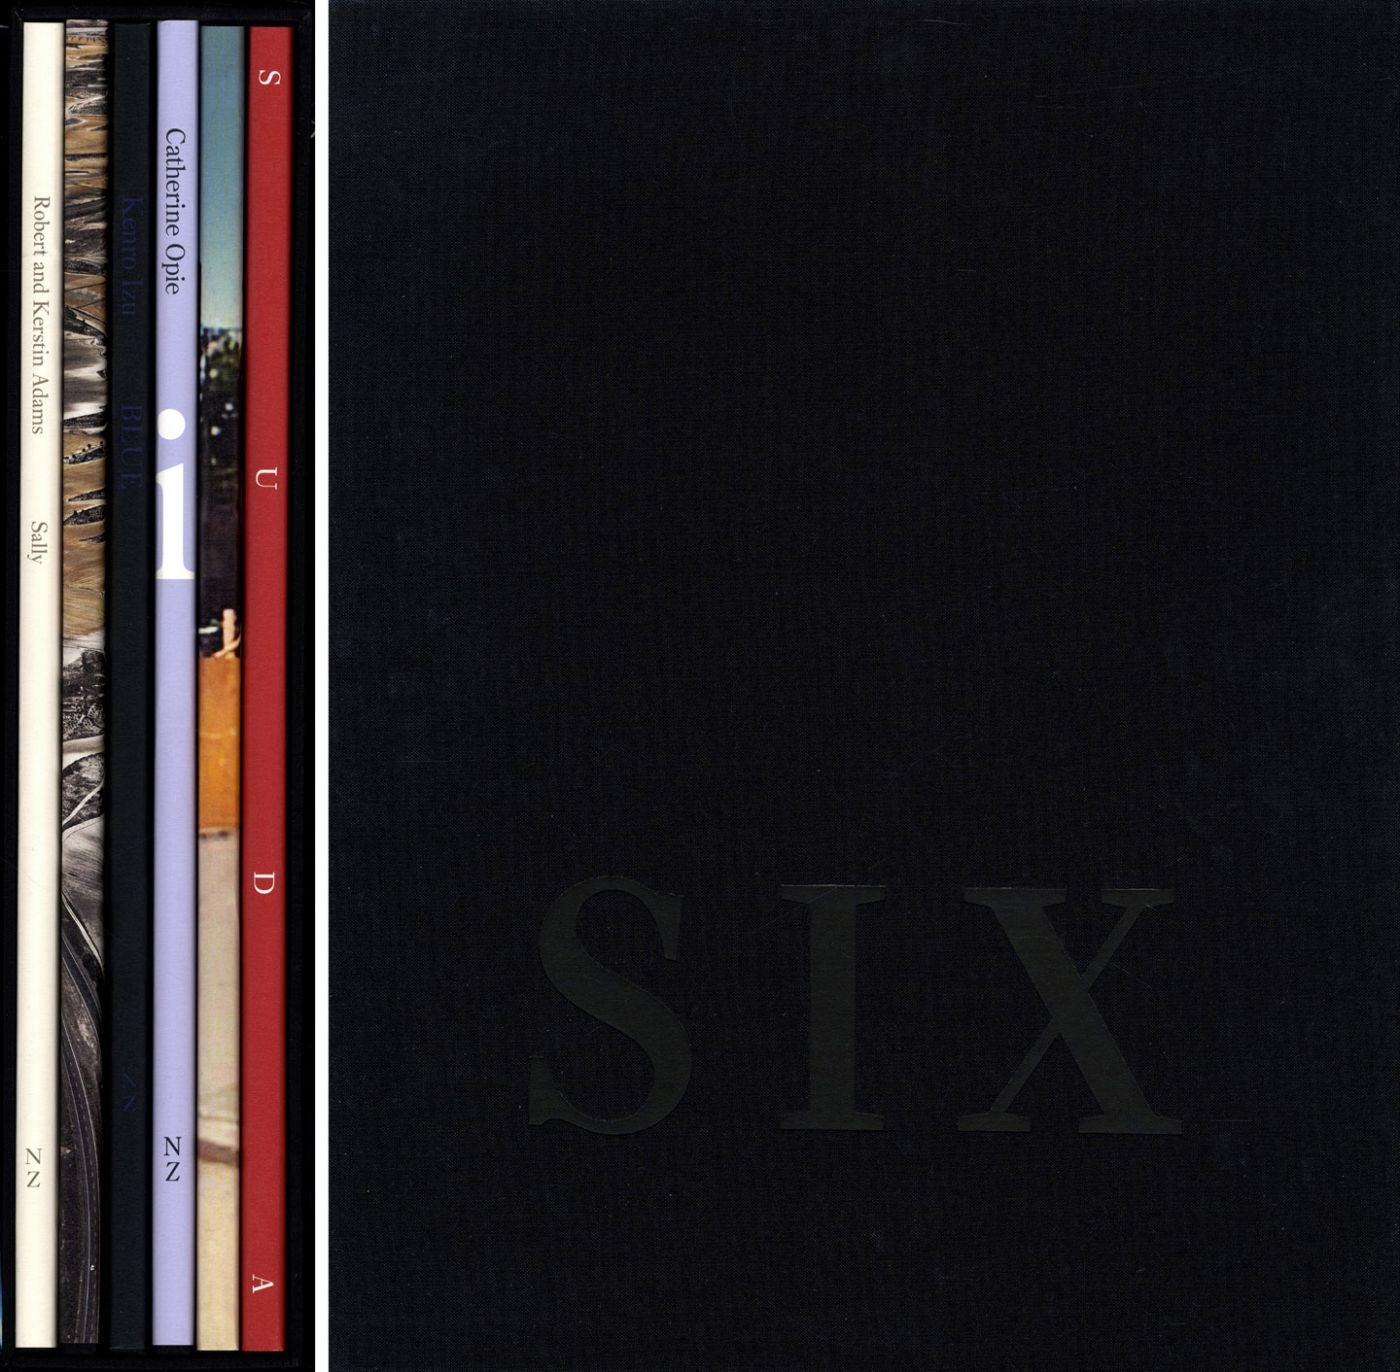 Nazraeli Press Six by Six (6 x 6) Subscription Series: Set 4 (of 6), Limited Edition (with 6 Prints): Robert Adams: Sally; Edward Burtynsky: Monegros (Dryland Farming); Kenro Izu: Blue; Catherine Opie: The Middle of Somewhere; Doug Rickard: A New American Picture; Issei Suda: Sparrow Island